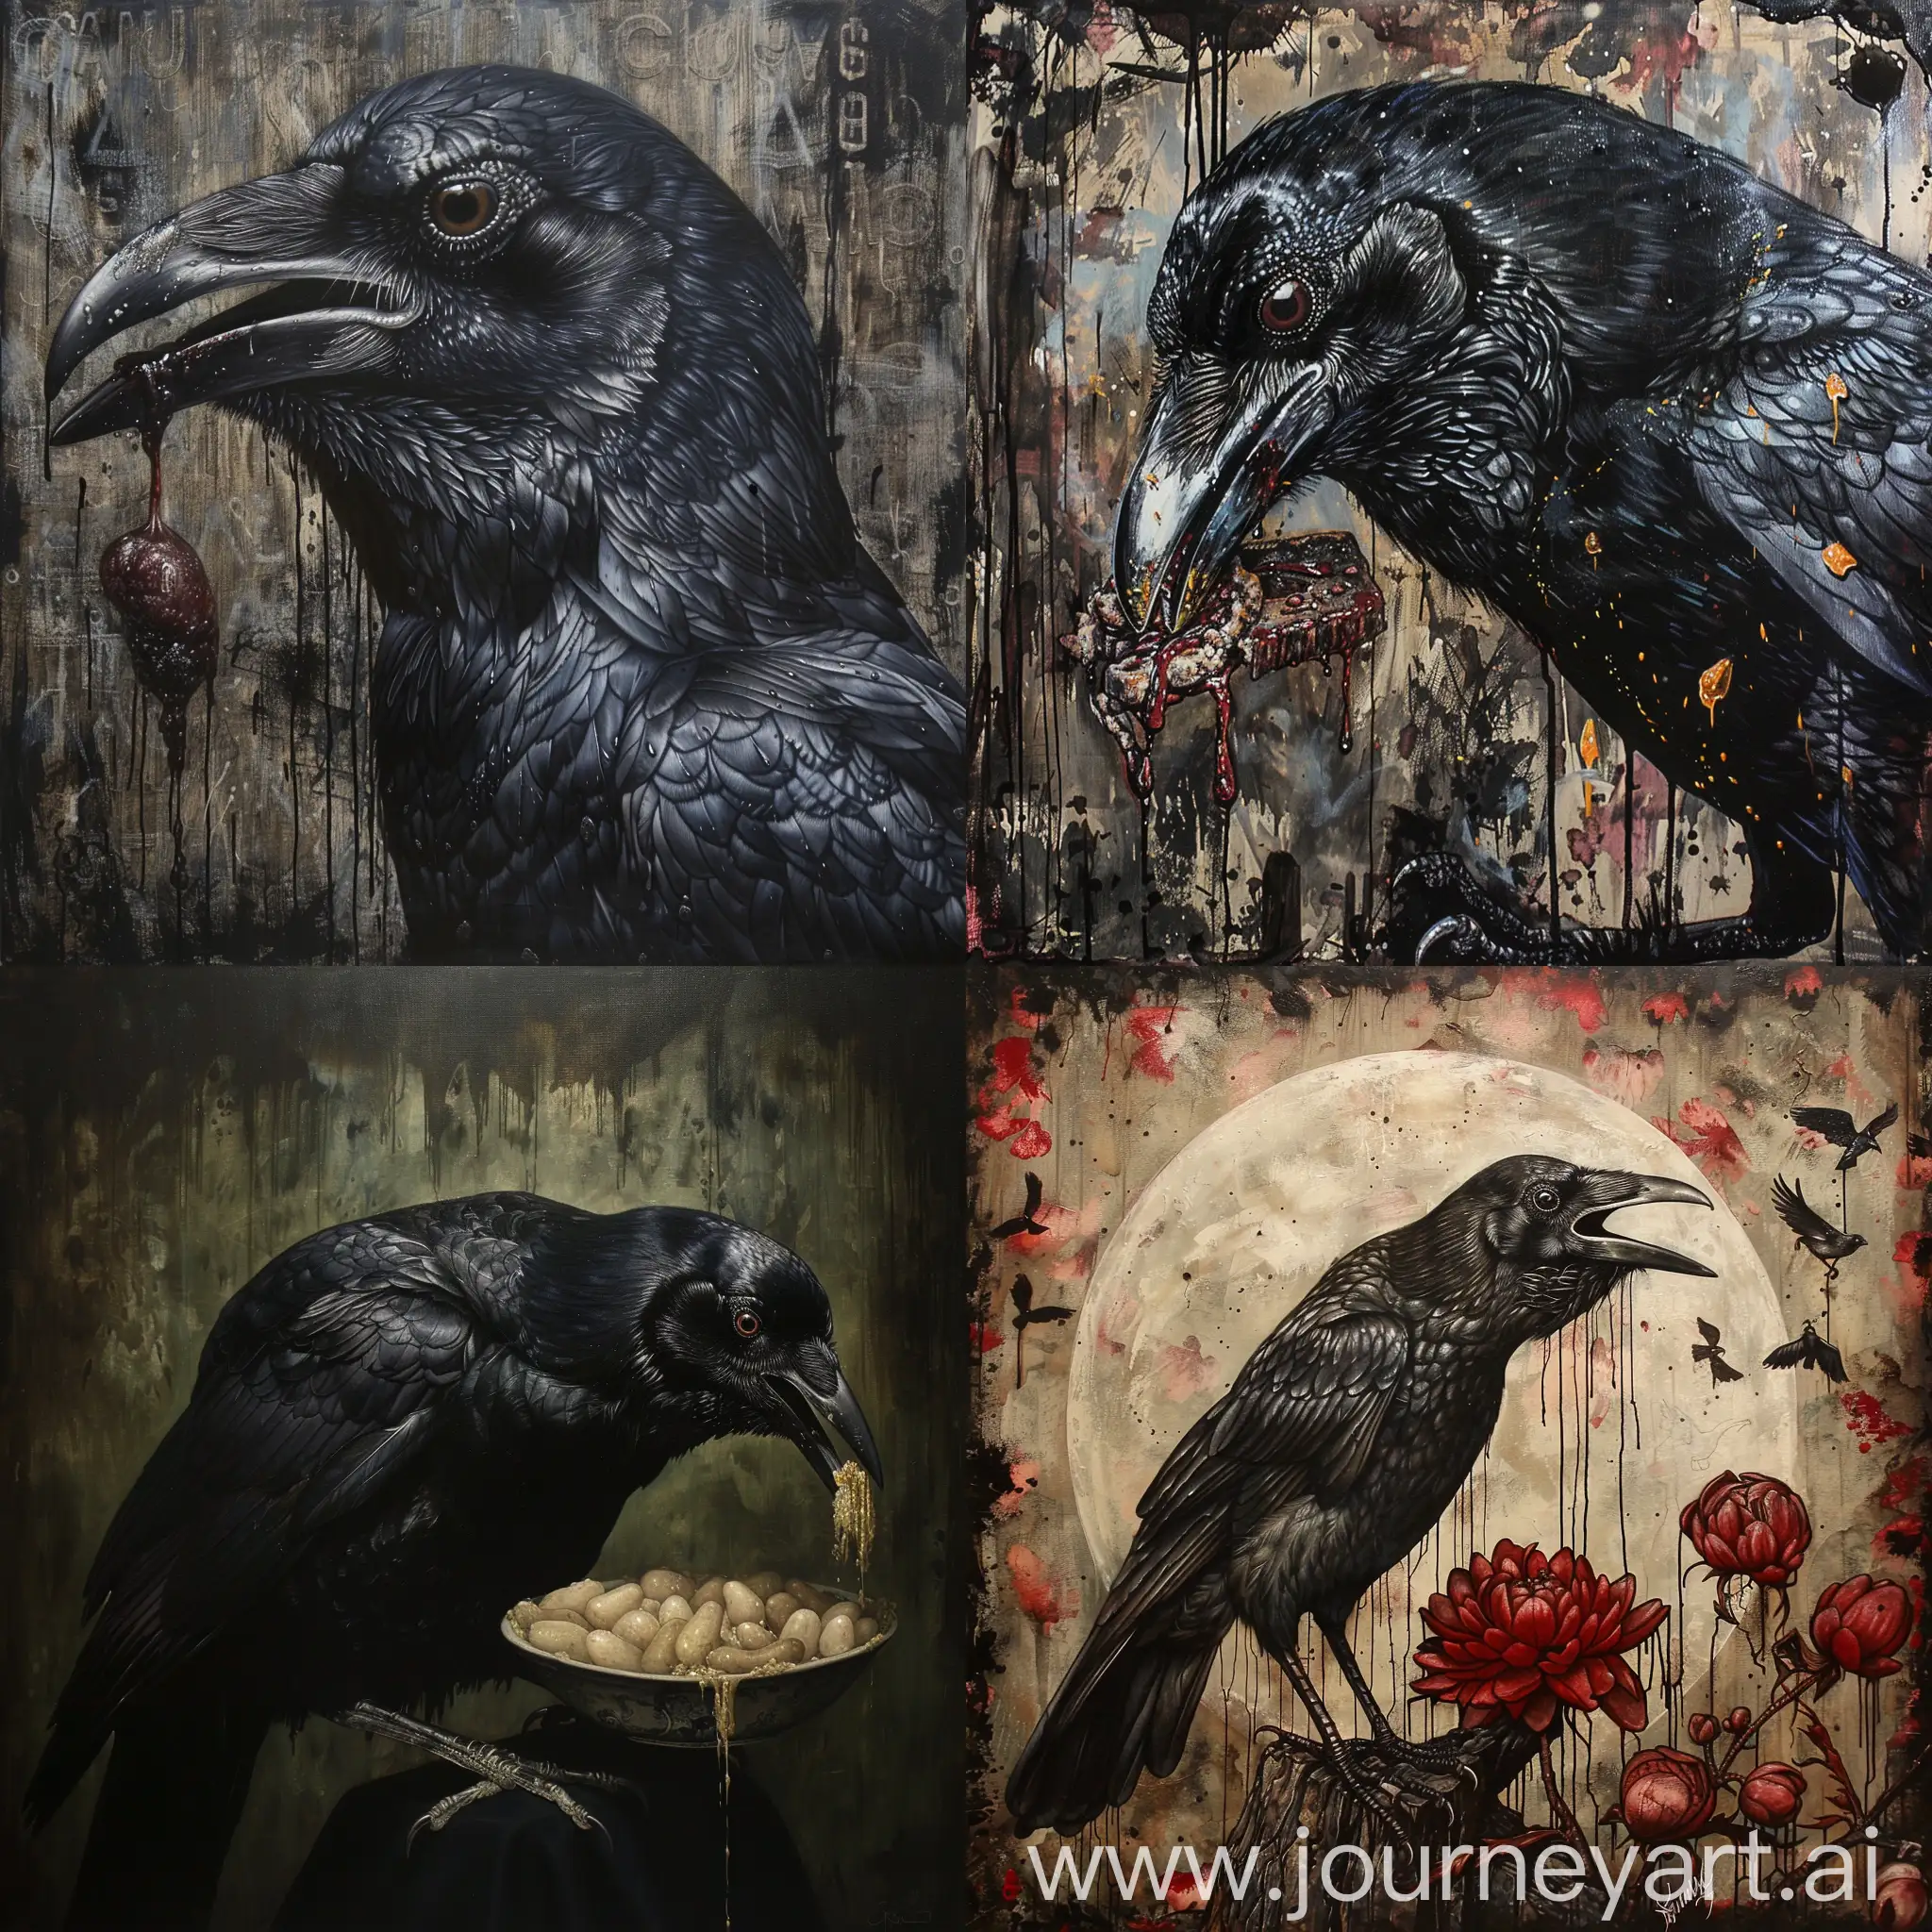 Allegorical-Representation-of-Humility-Crow-Feasting-Scene